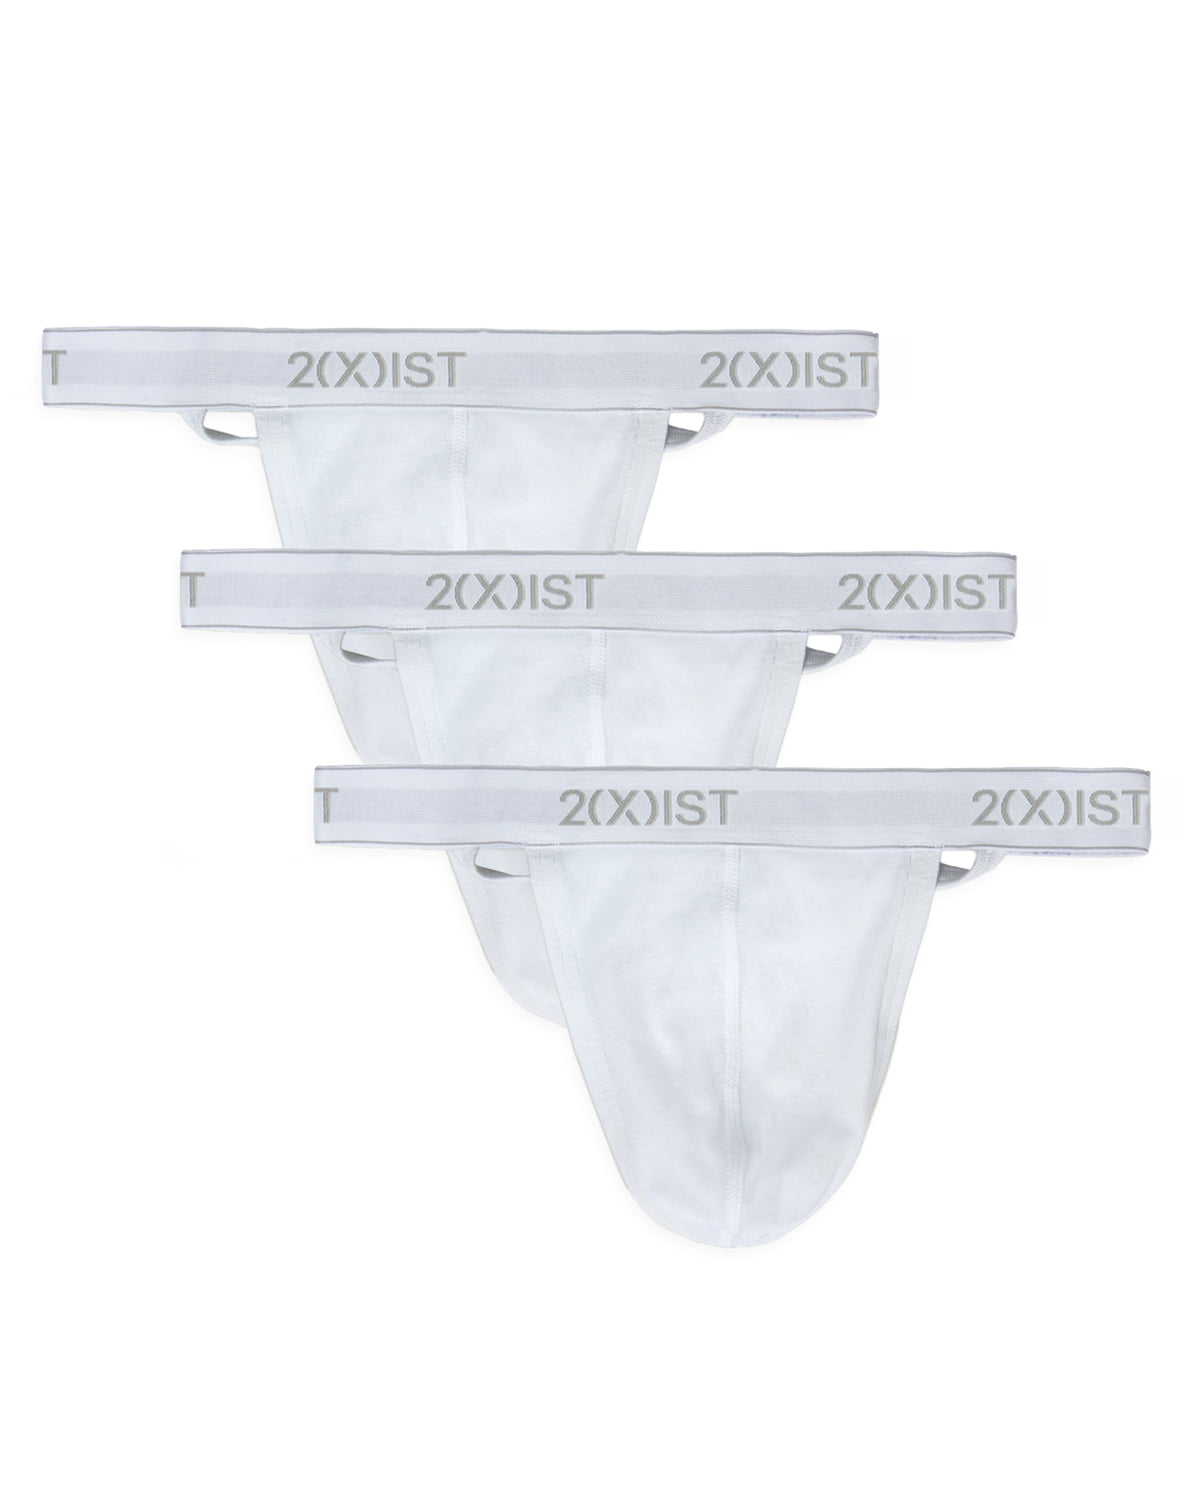 Men's Cotton Thong Sports T-Back - Comfortable and Stylish 3 Pack